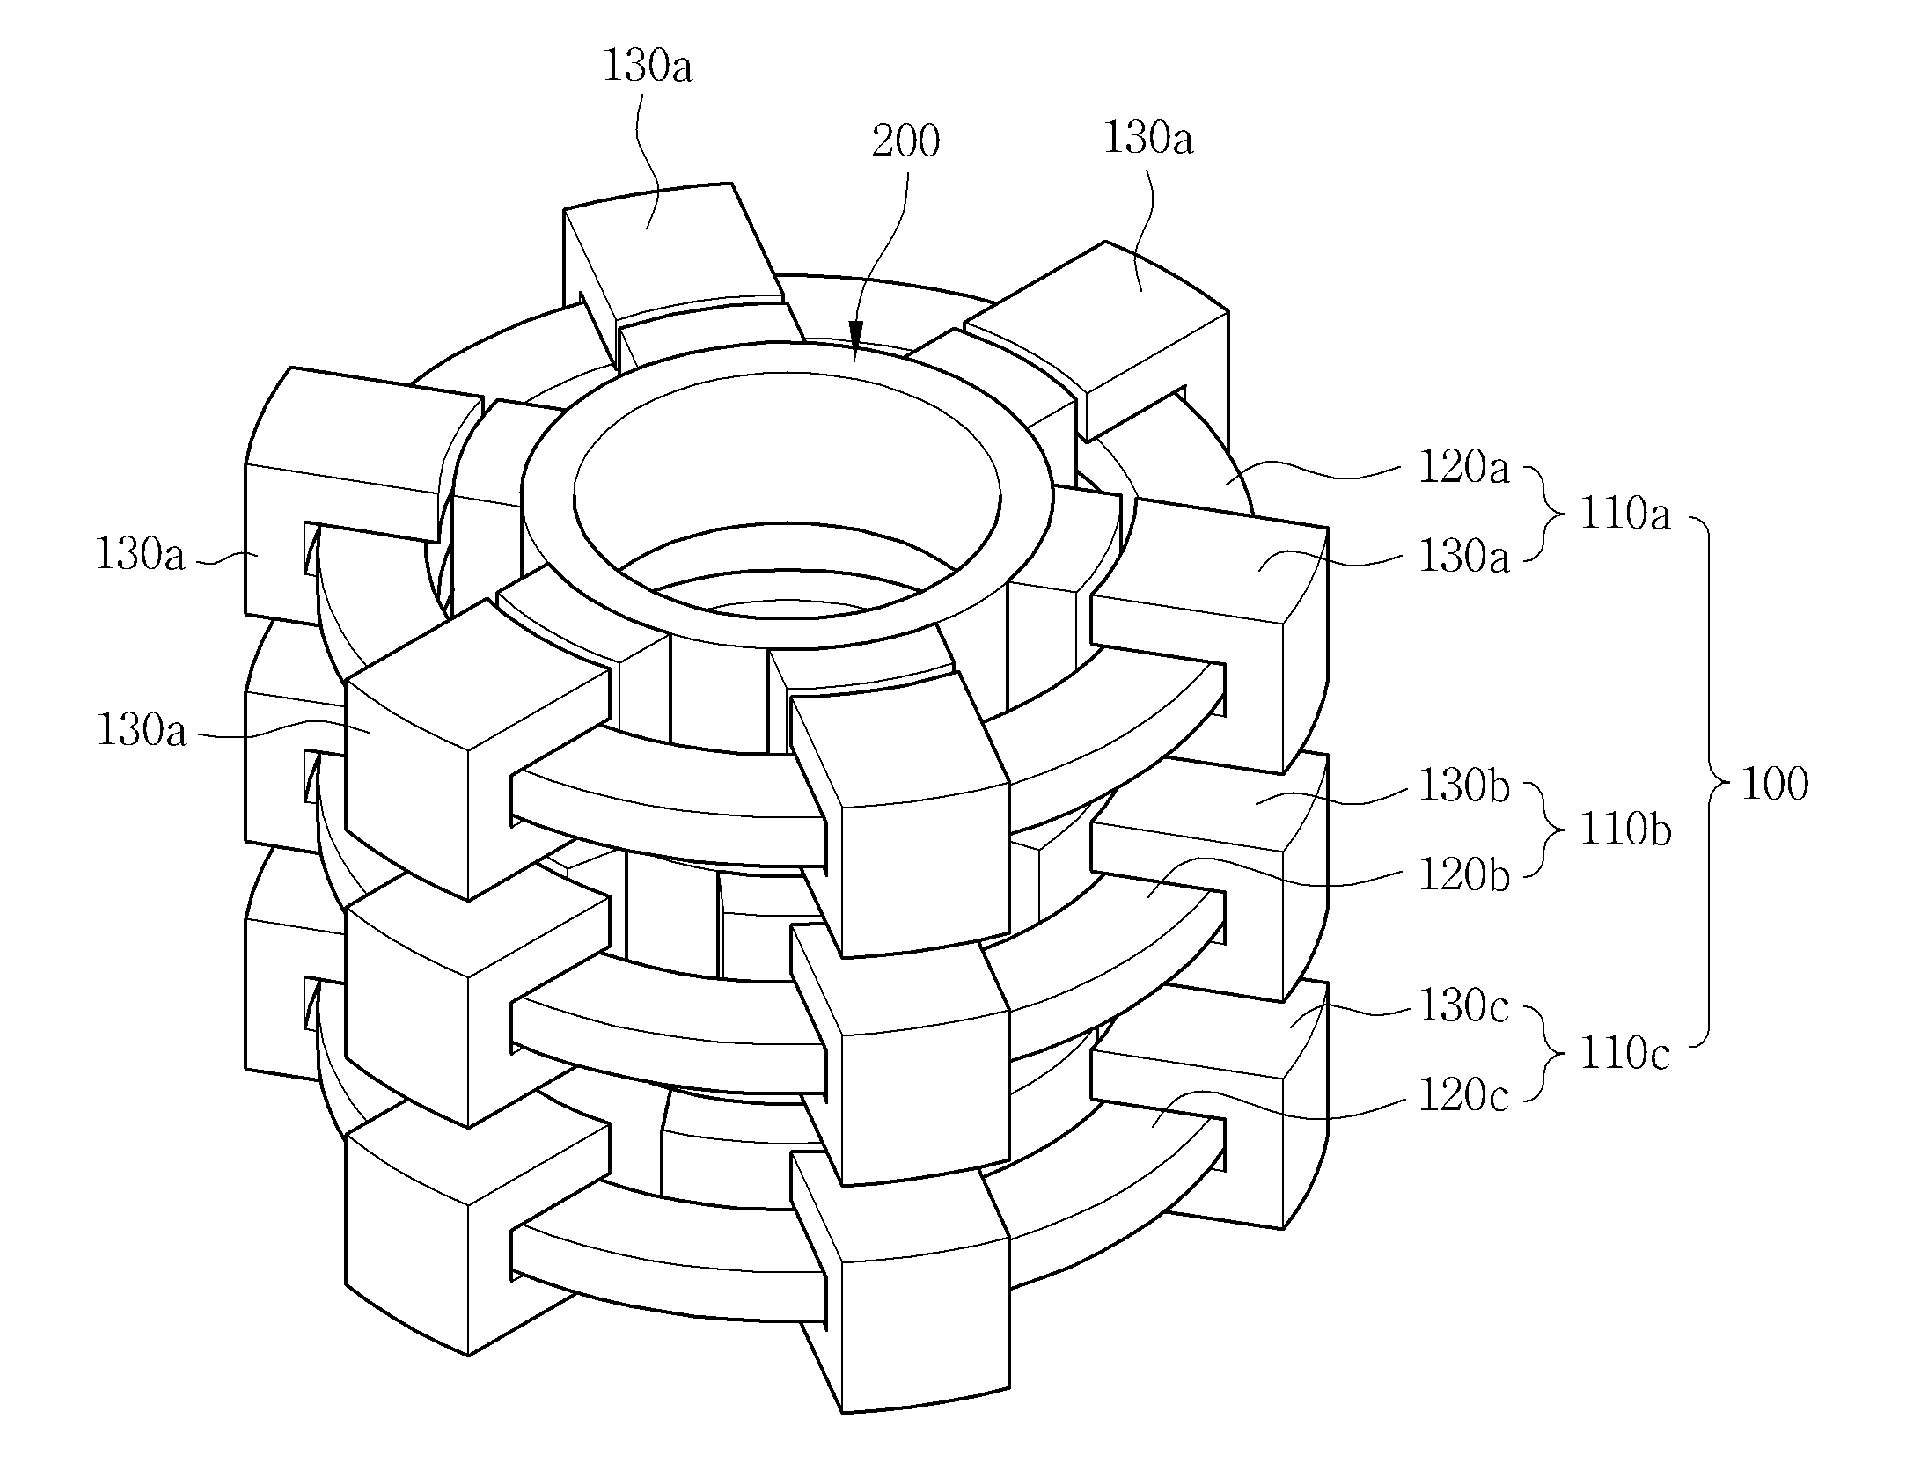 Traversal switched reluctance motor